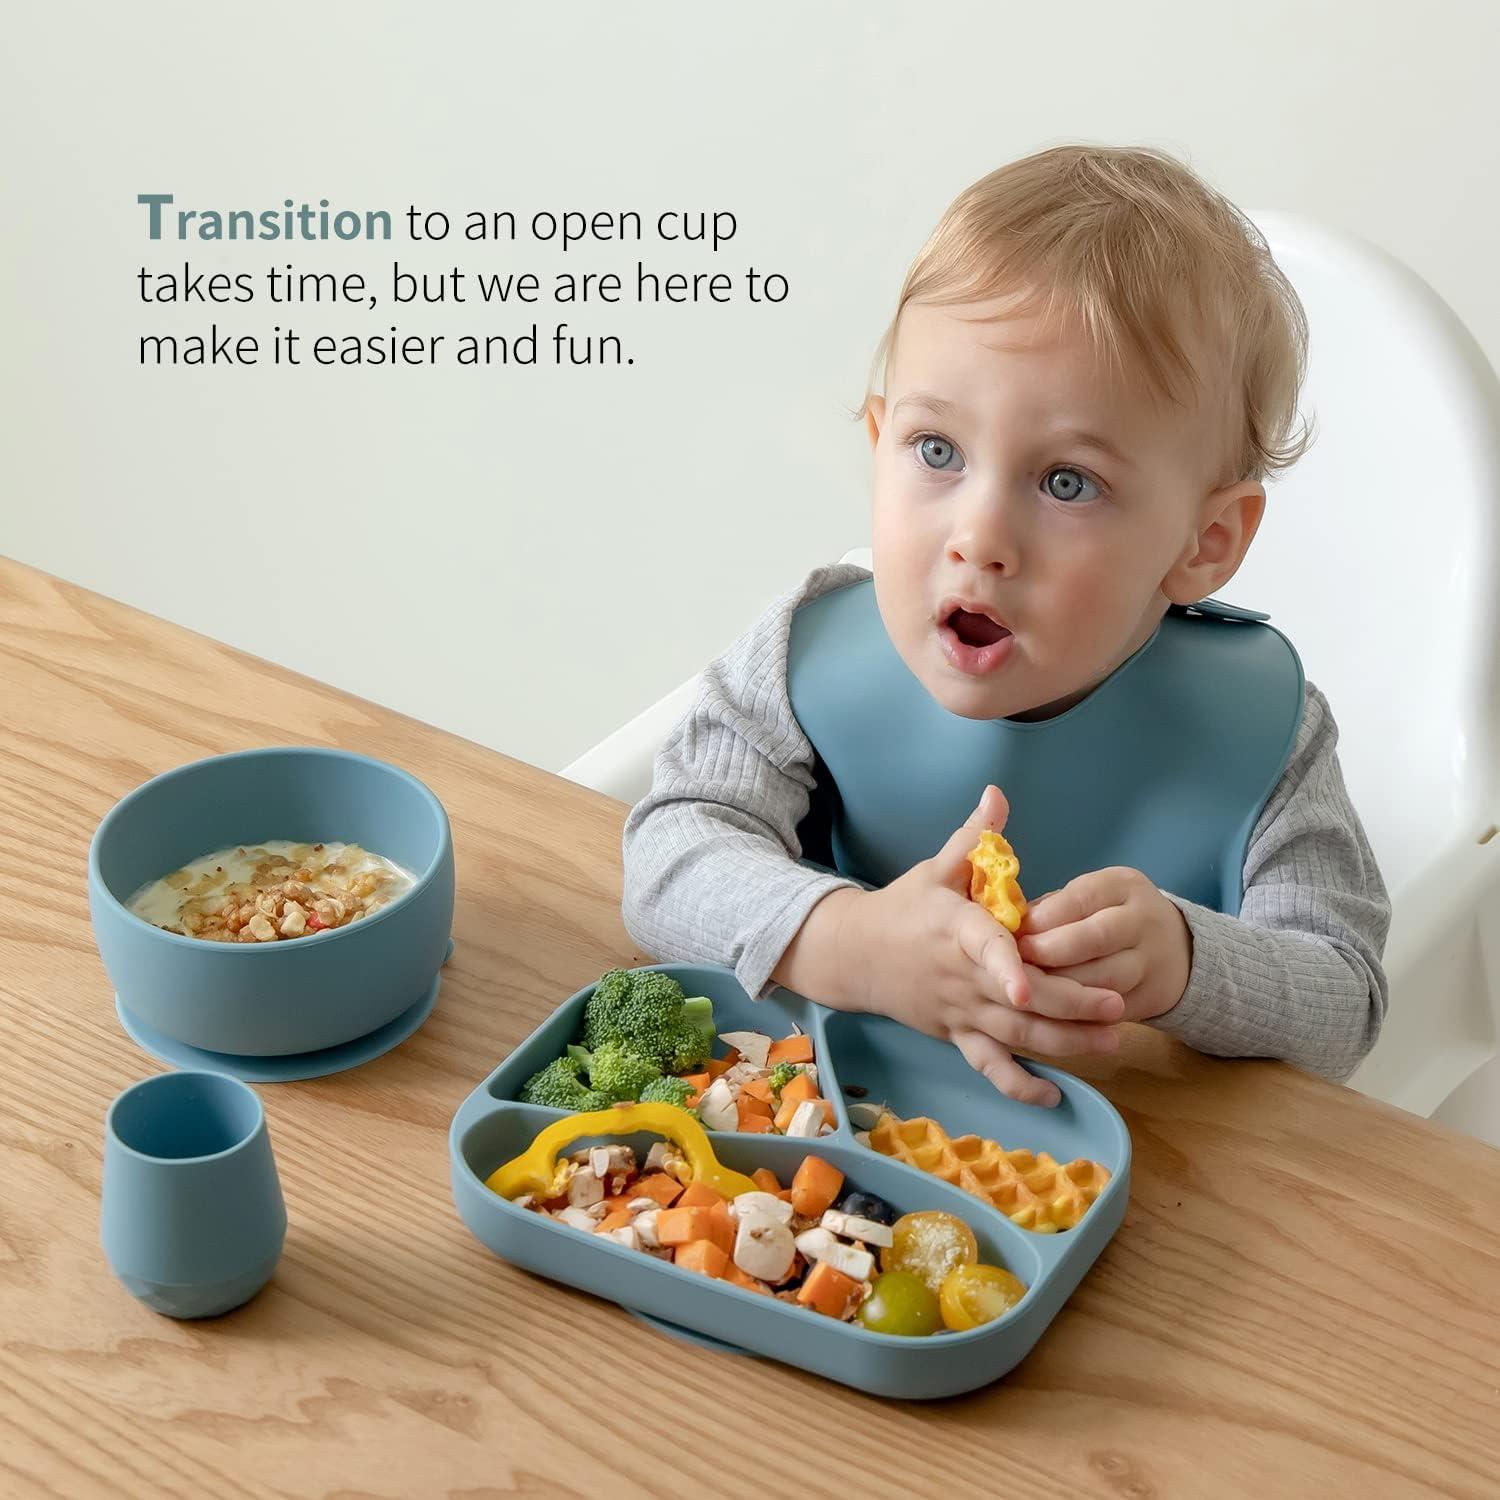 SAMiGO Silicone Baby Feeding Set, Baby Led Weaning Supplies, Suction Plate,  Bowl, Spoons, Food Bib, Cup, First Stage Self Eating Utensils, 6+ Months